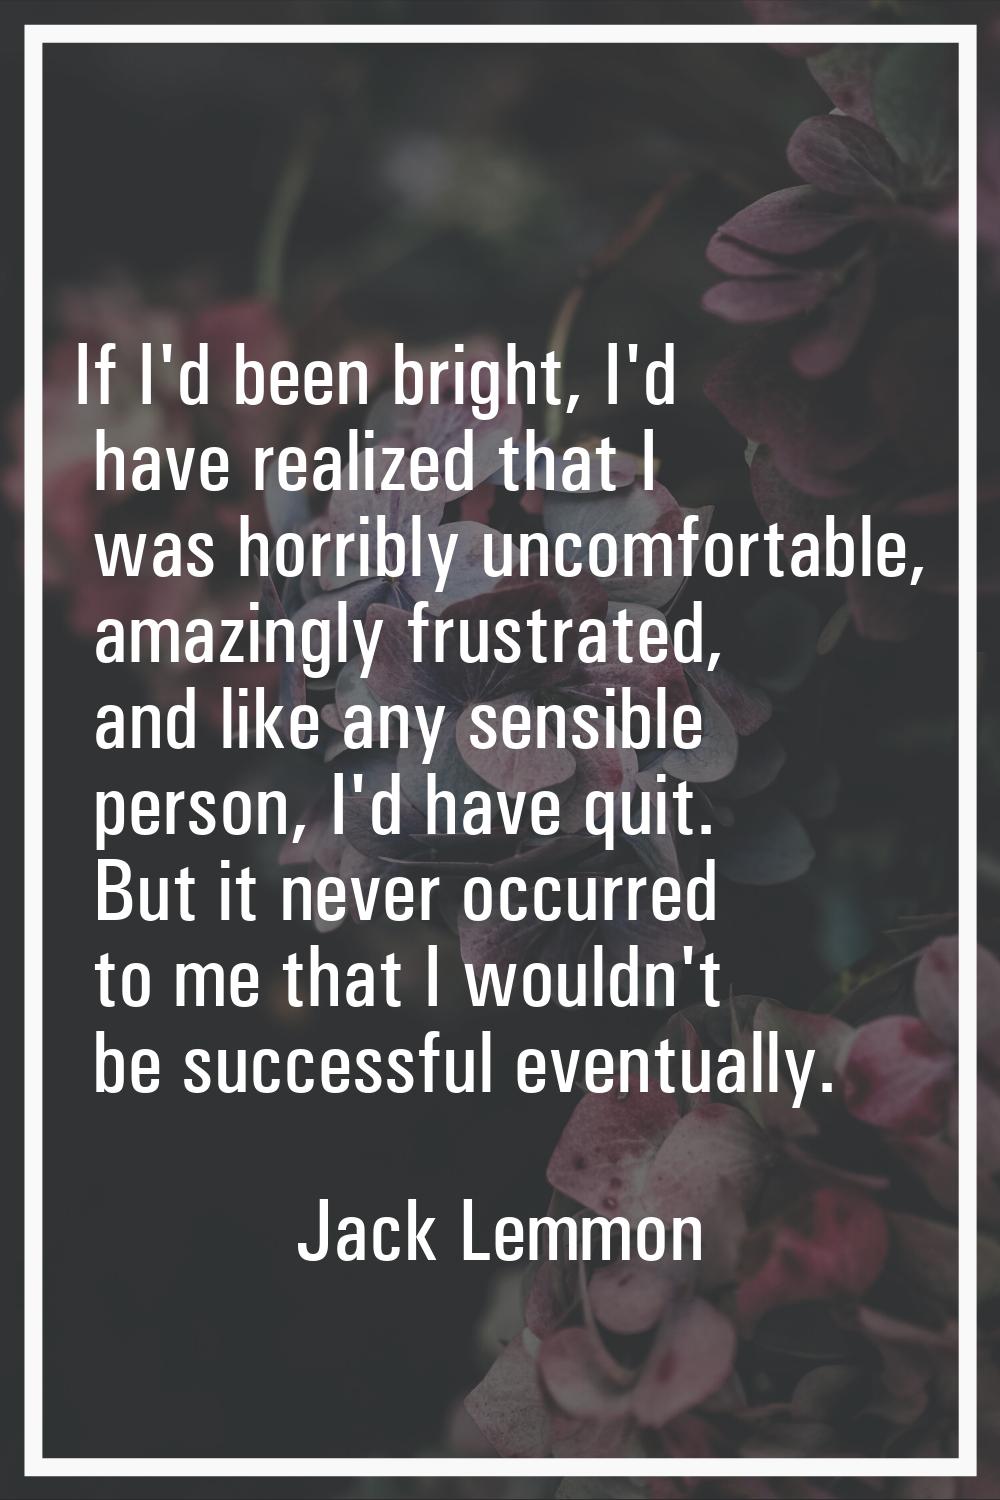 If I'd been bright, I'd have realized that I was horribly uncomfortable, amazingly frustrated, and 